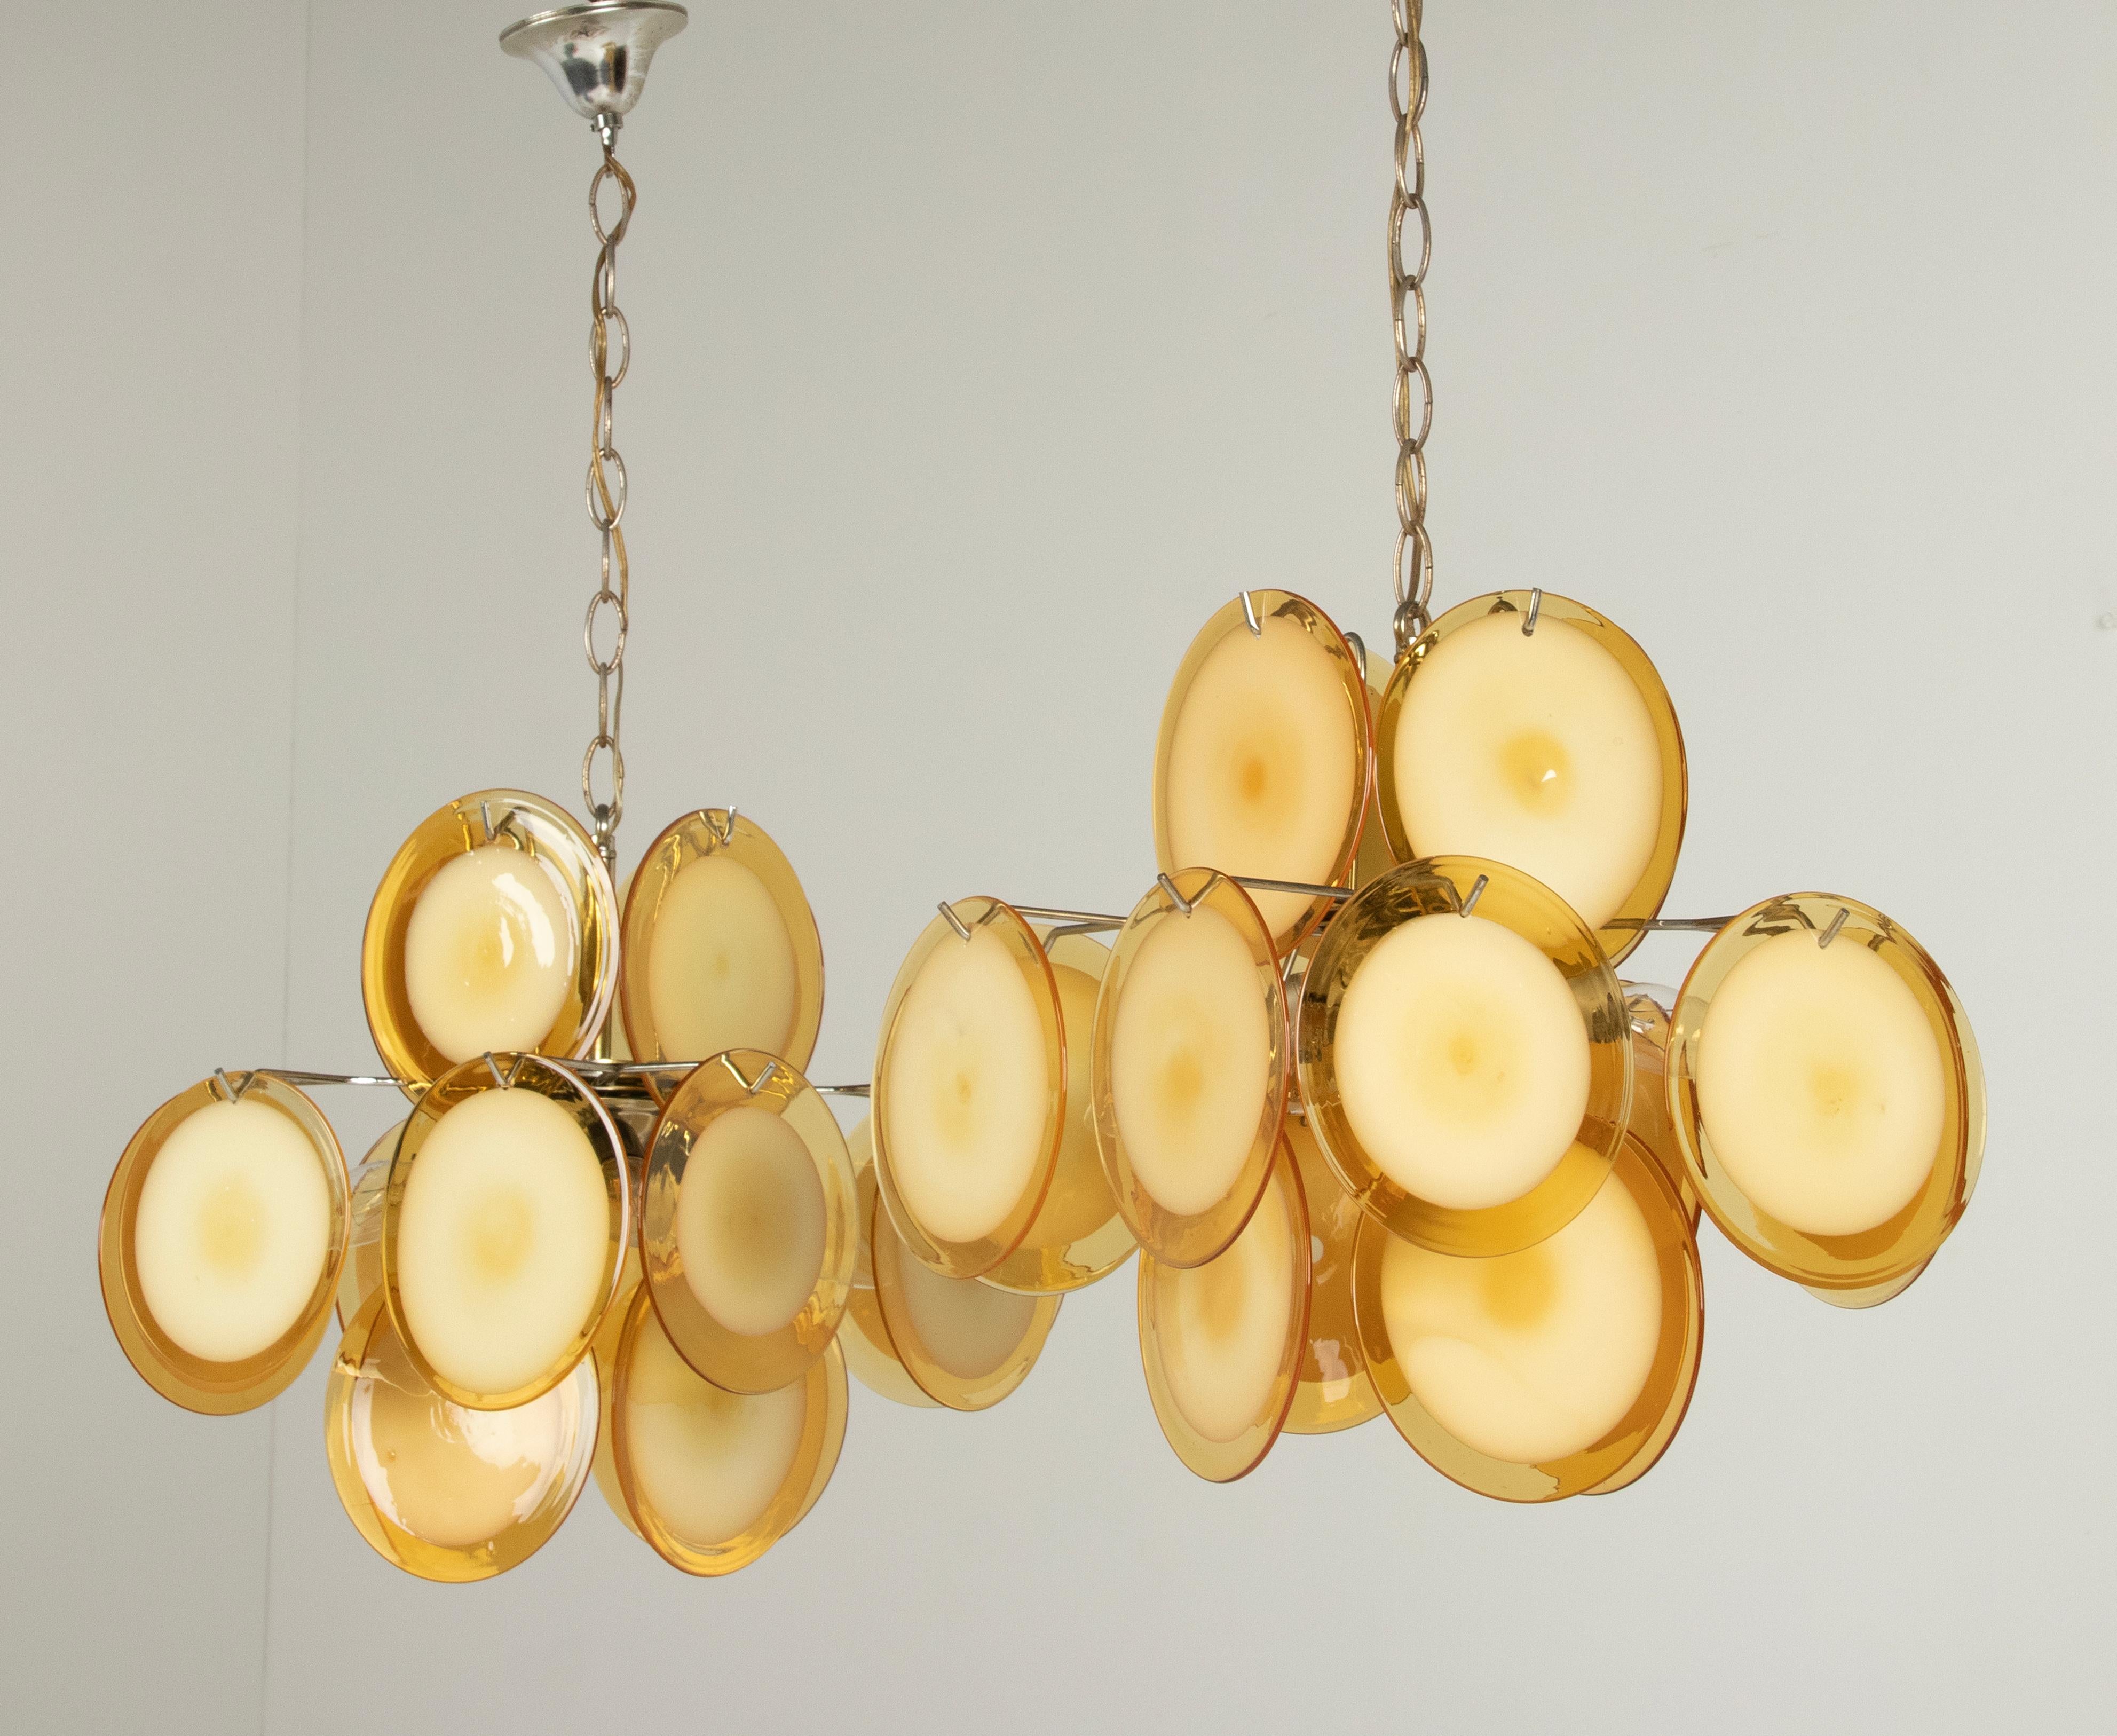 A pair of Italian Murano chandeliers attributed to Vistosi. The chandelier has 16 hand blown glass disks made of yellow/orange Murano glass, hanging in a metal frame. The lamp has 4 lights (E14 sockets), which gives an atmospheric light. Made in